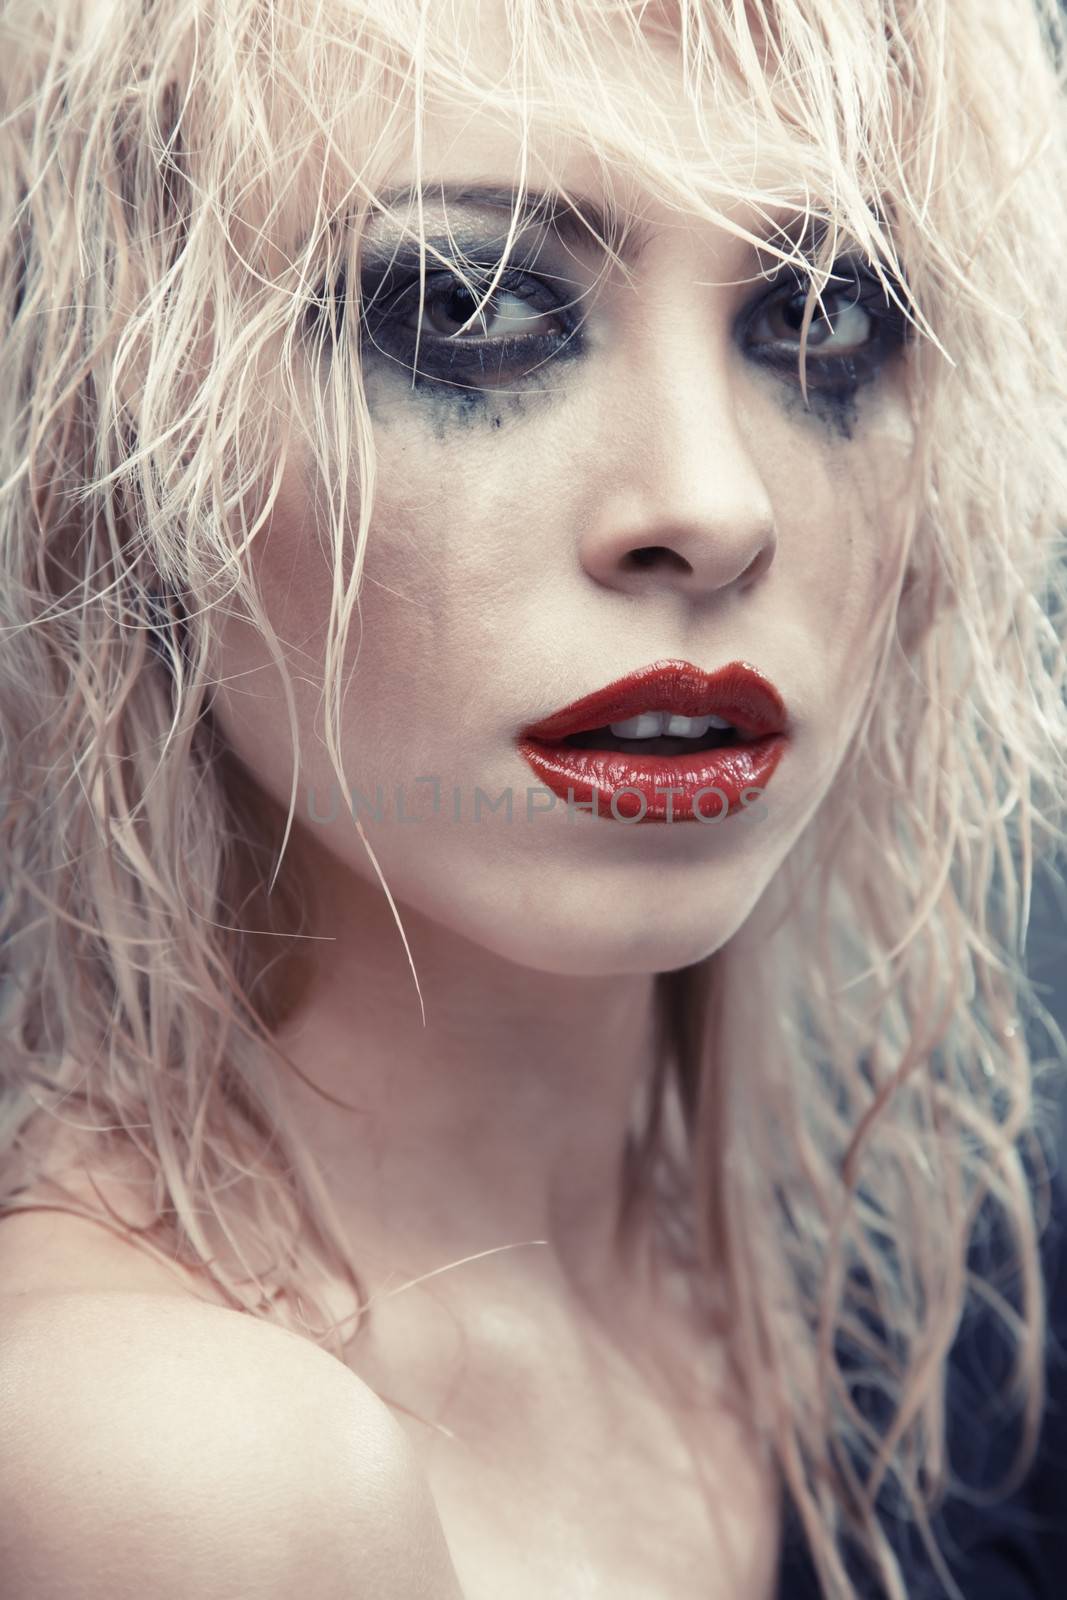 Blond lady with strange makeup. Vertical photo